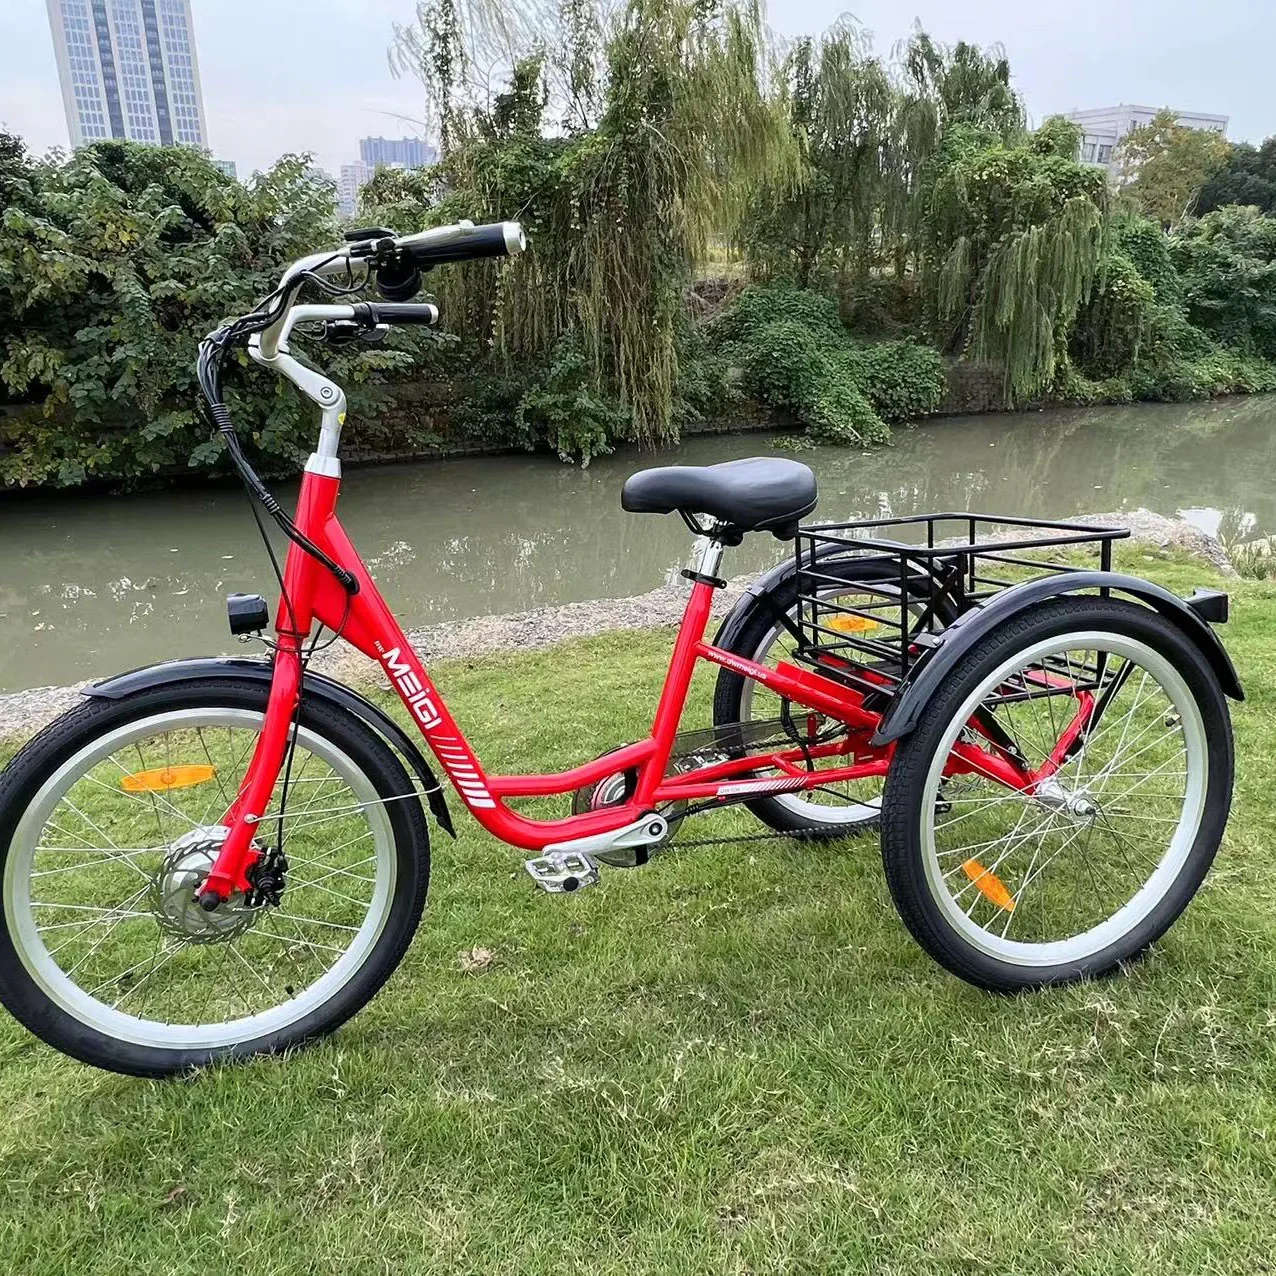 MEIGI Good Quality Urban E Tricycle  350W Motor Cargo Delivery Ebike 3 Wheel Electric Tricycle For Adults custom new 48v 750w electric 3 wheel bike brushless motor kit for adults tricycle rickshaw bikes